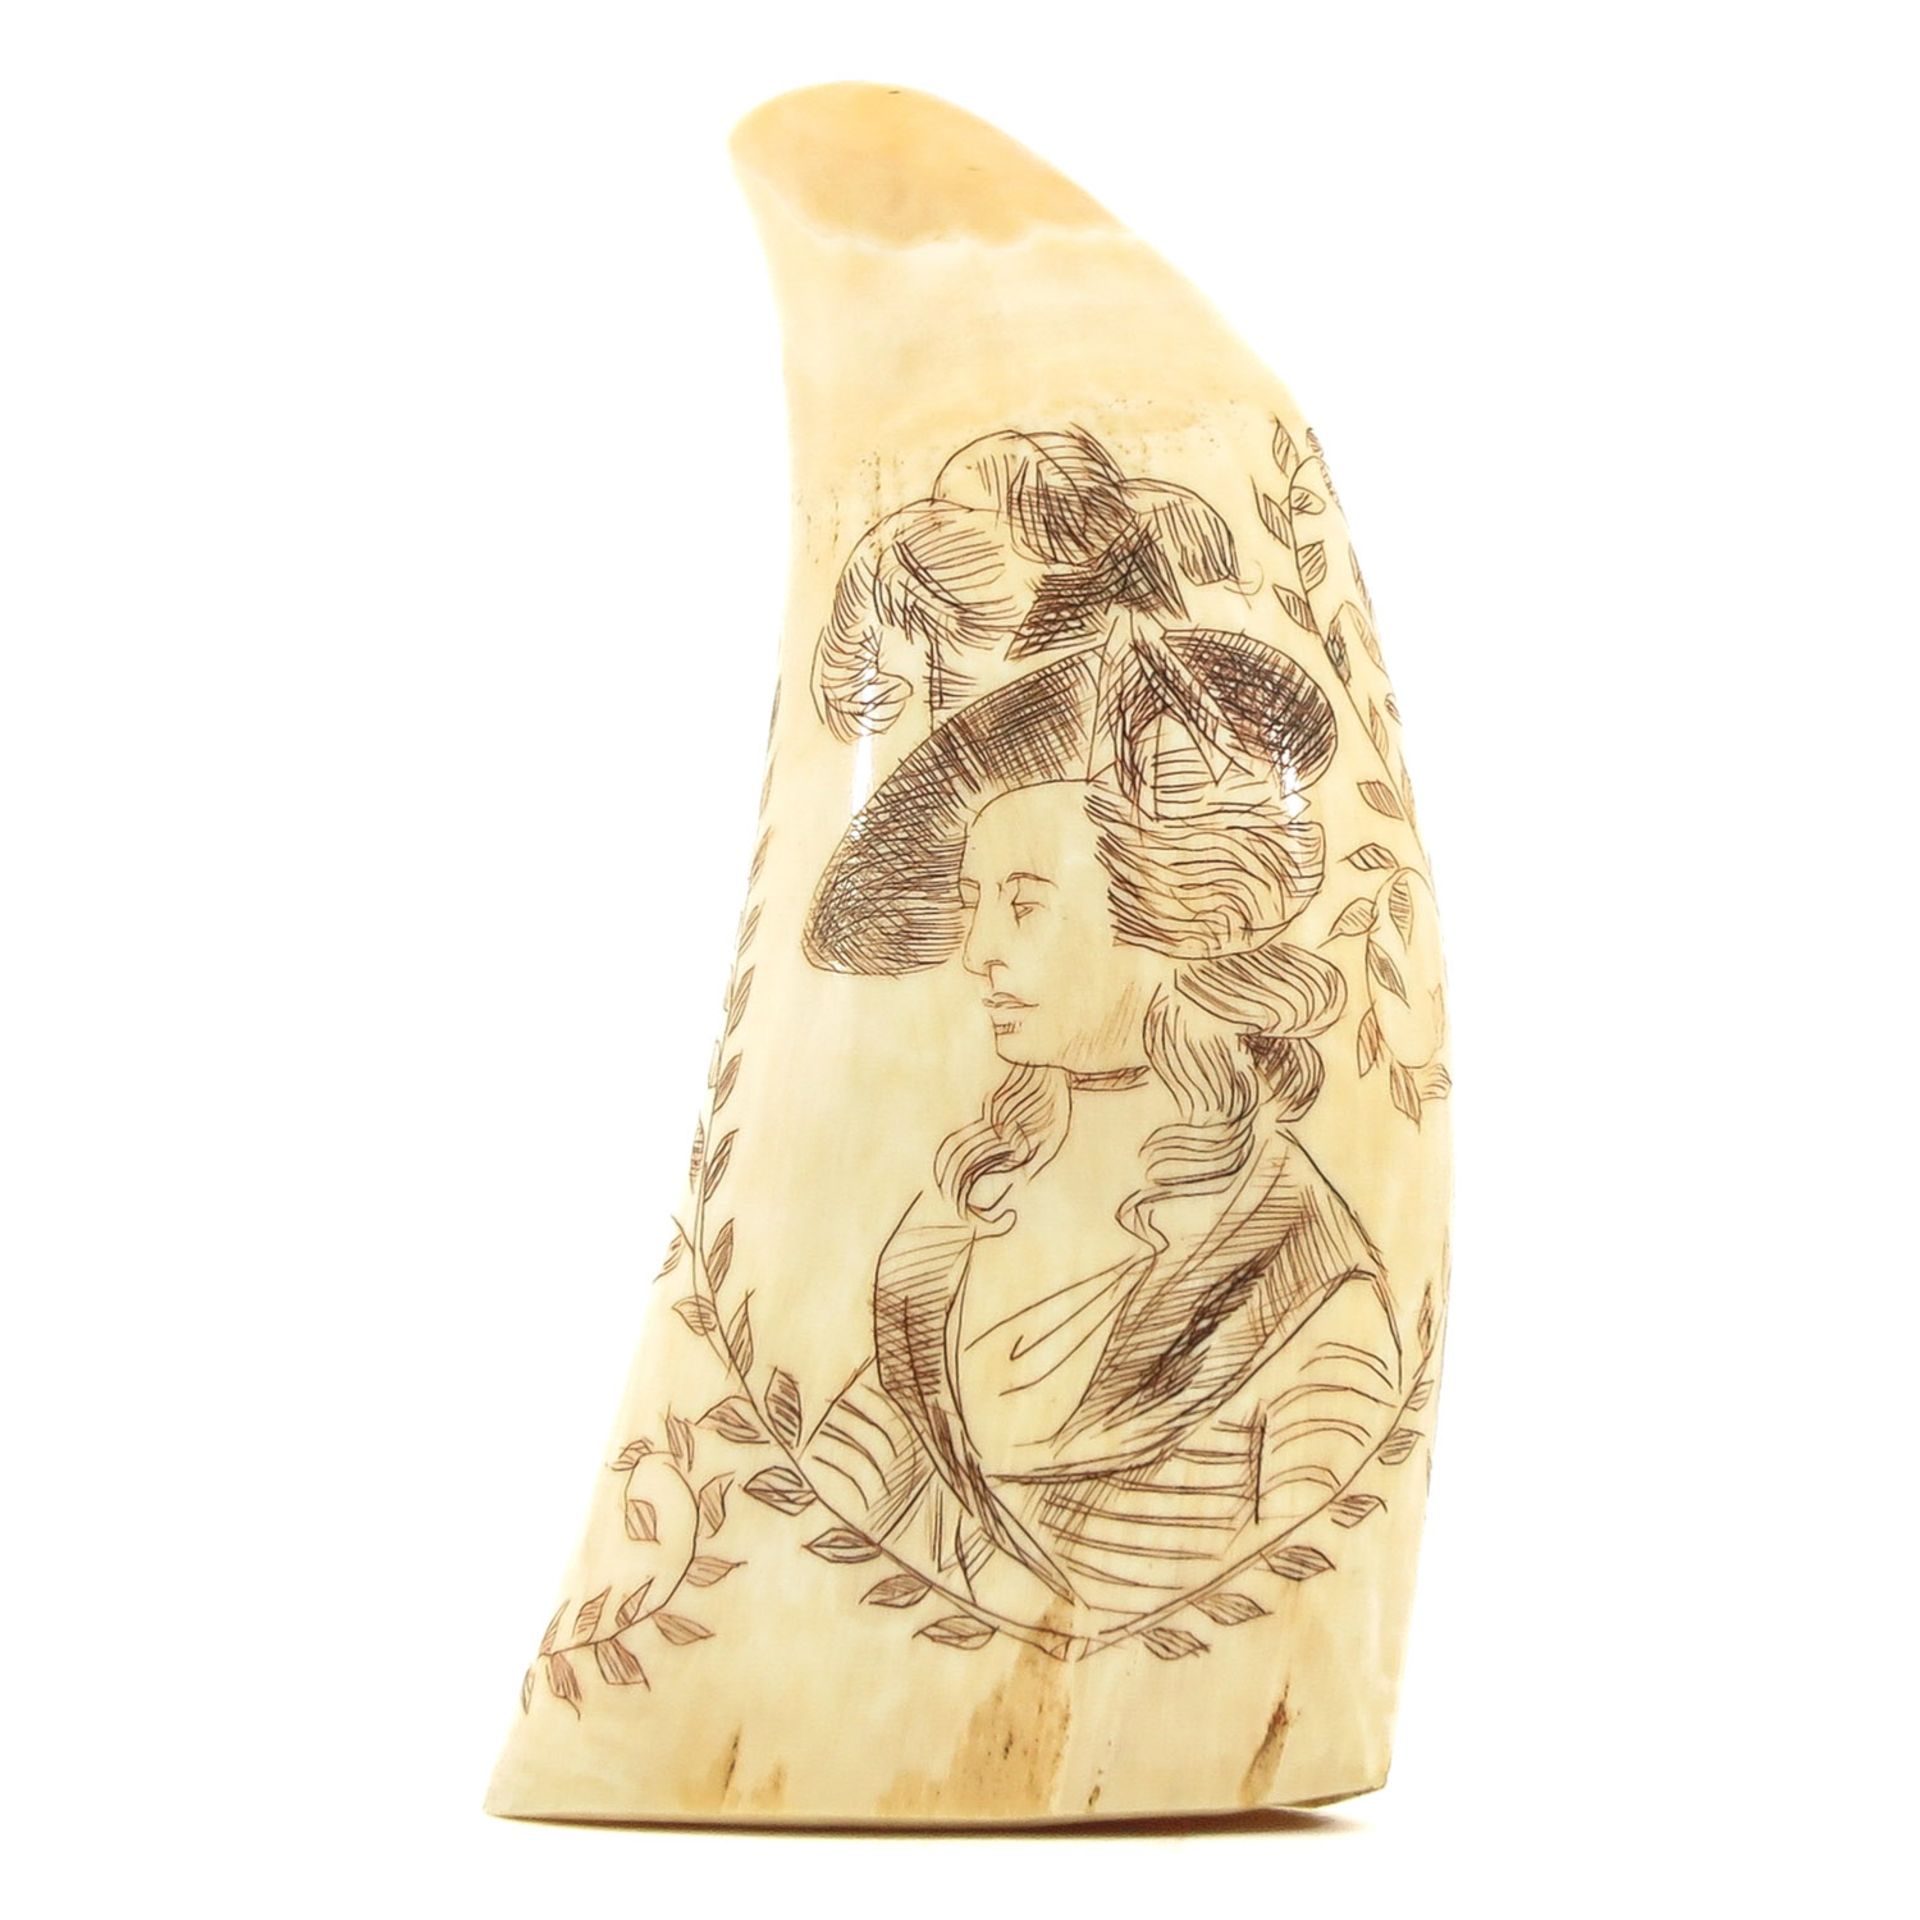 A 19th Century Scrimshaw Depicting Lady - Image 3 of 8